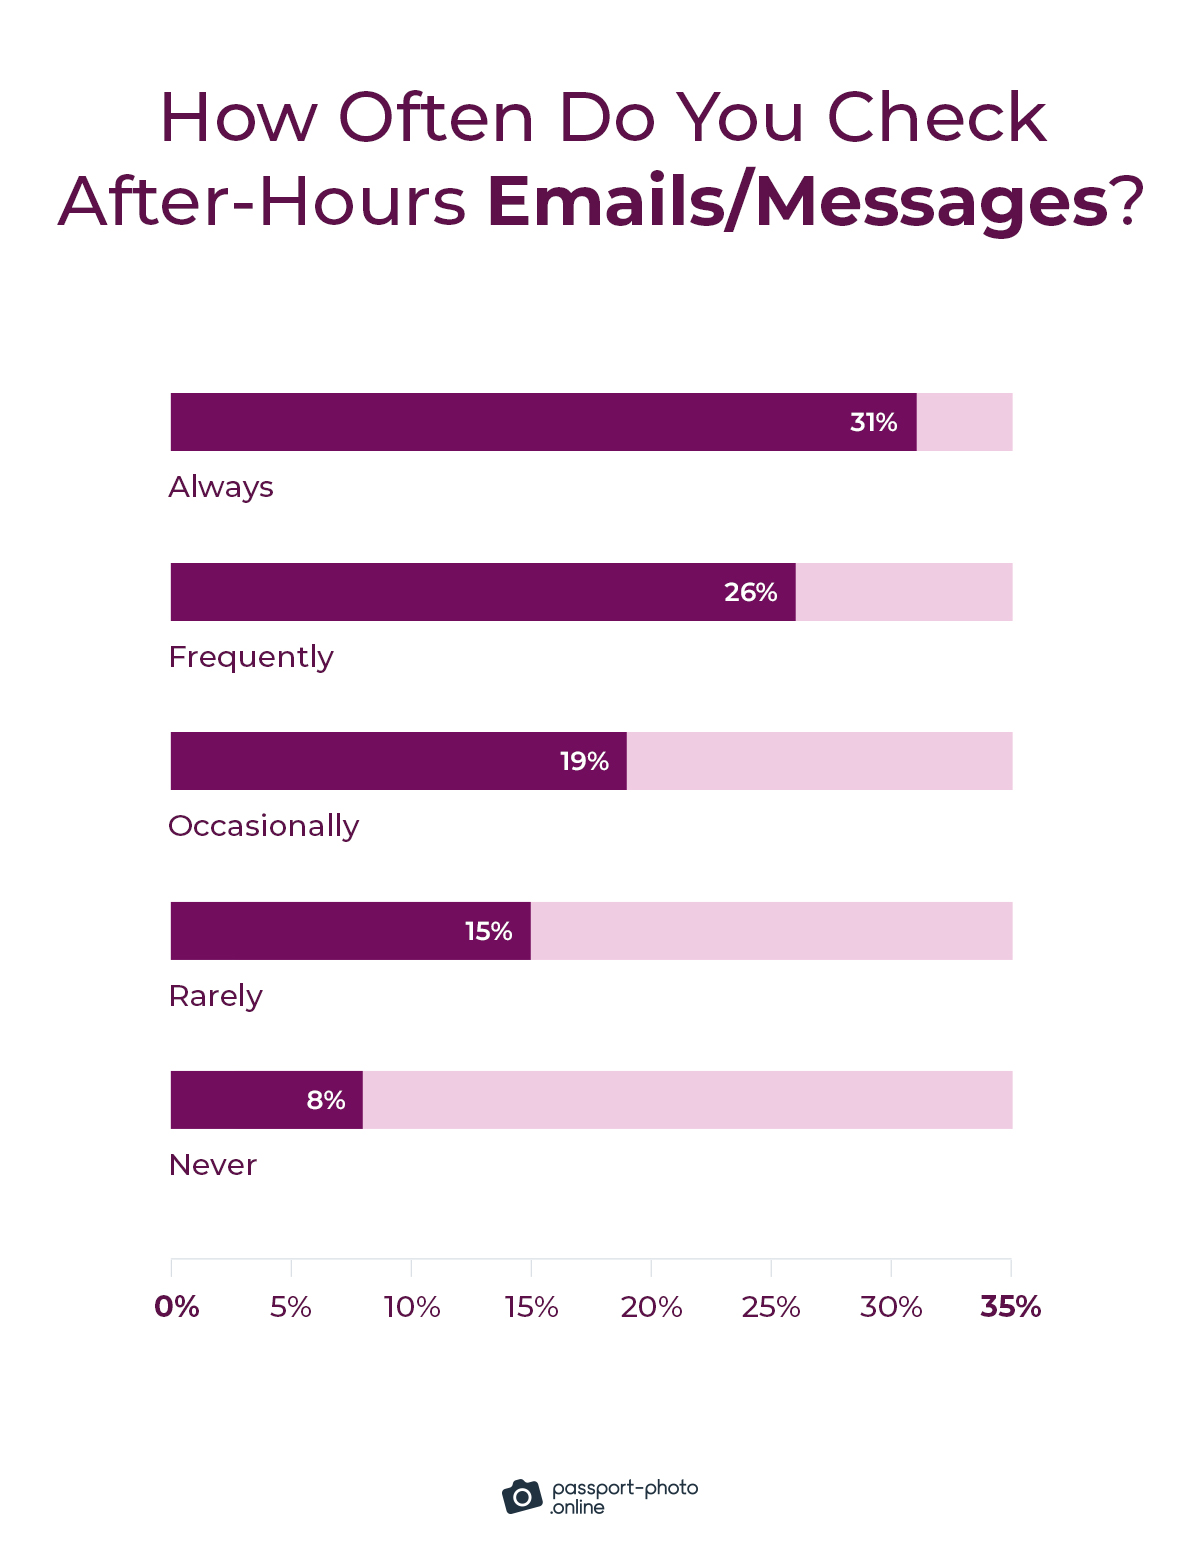 76% check emails/messages outside of work hours occasionally, frequently, or always